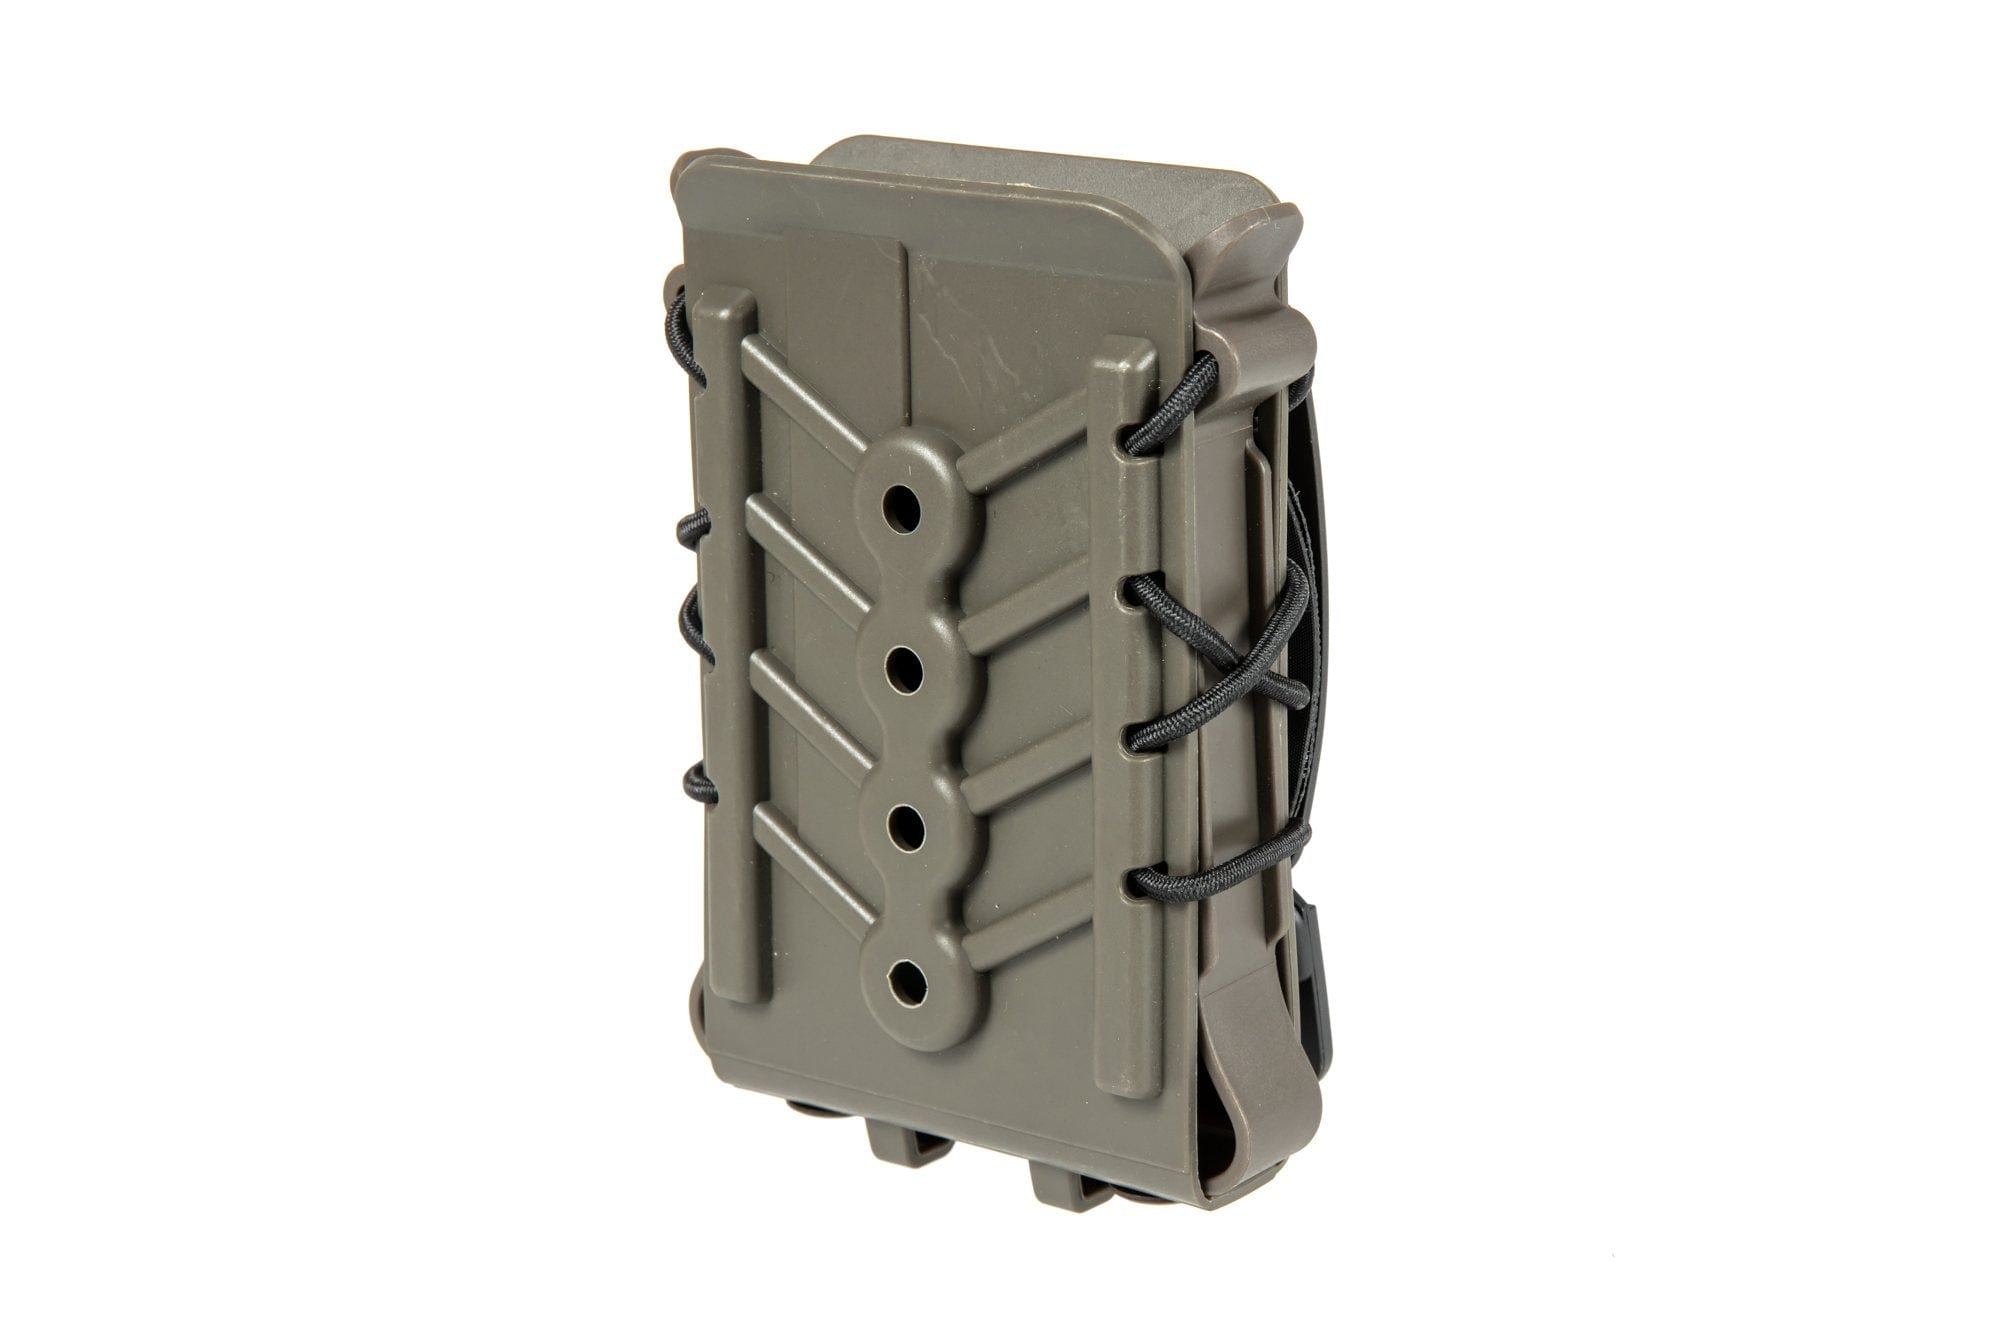 HSG 7.62 Magazine Pouch - Olive Drab